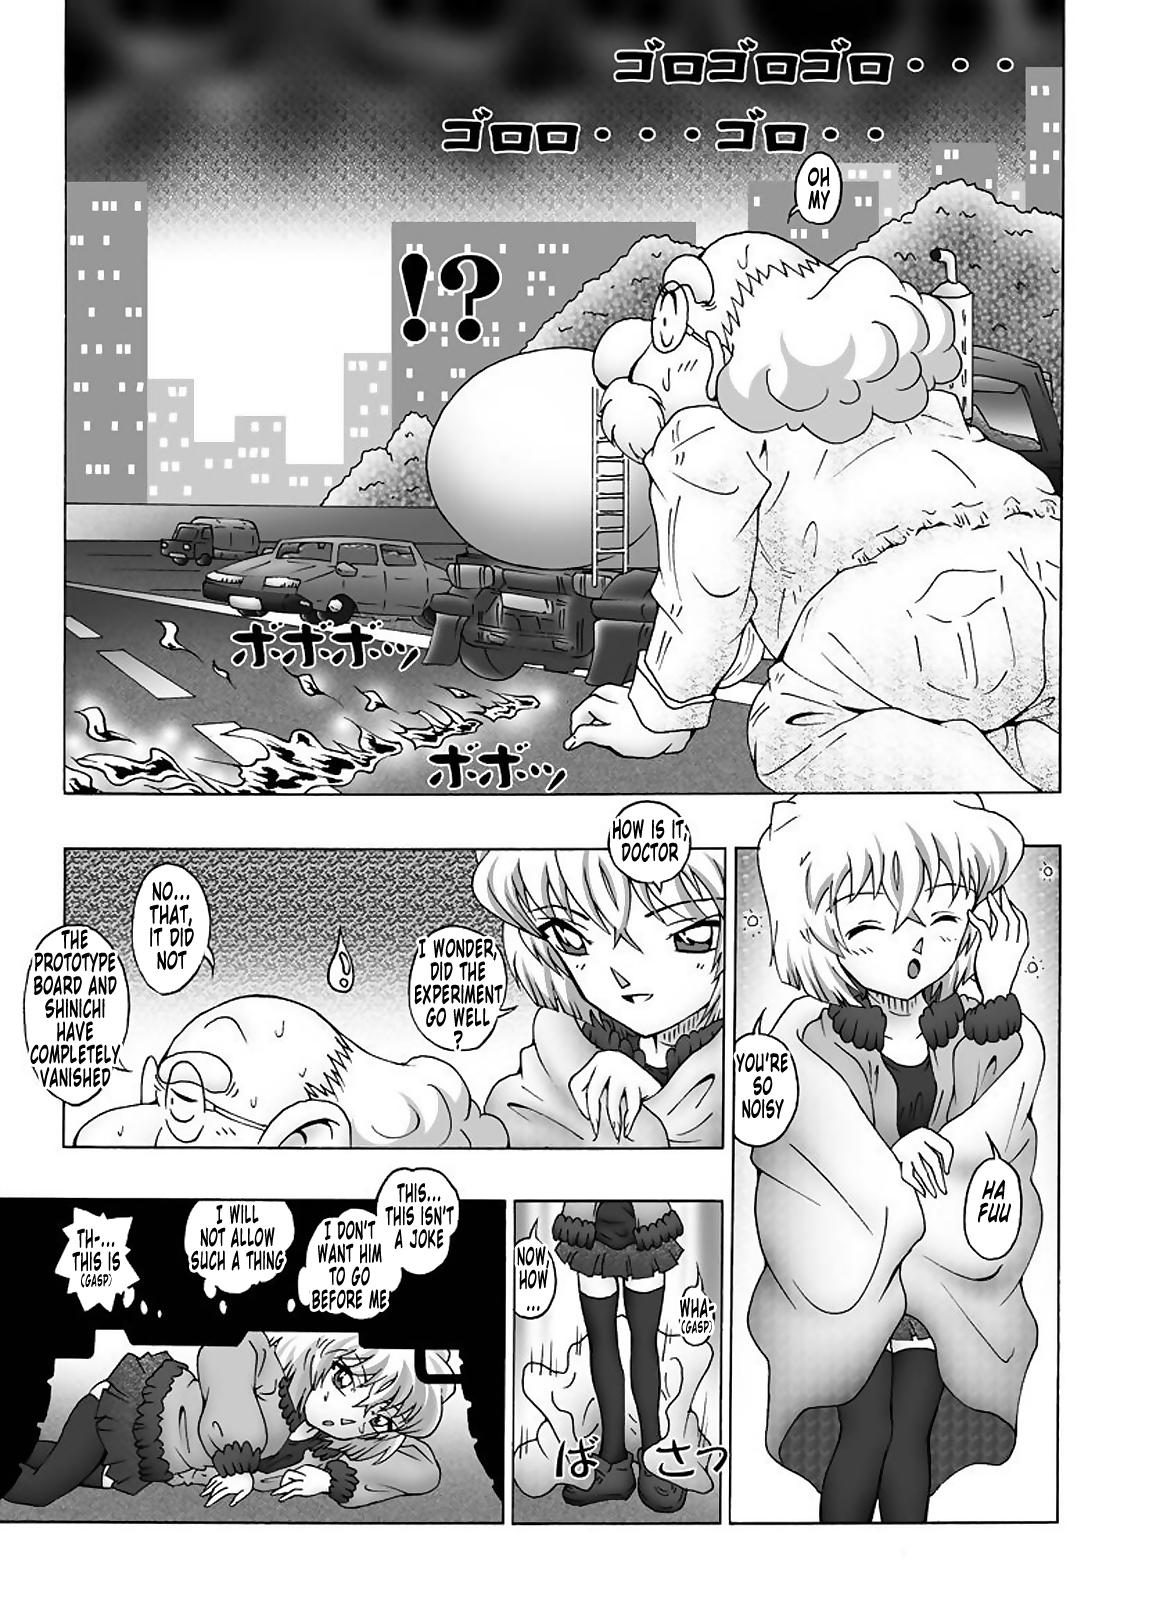 Canadian Bumbling Detective Conan - File 12: The Case of Back To The Future - Detective conan Transexual - Page 6